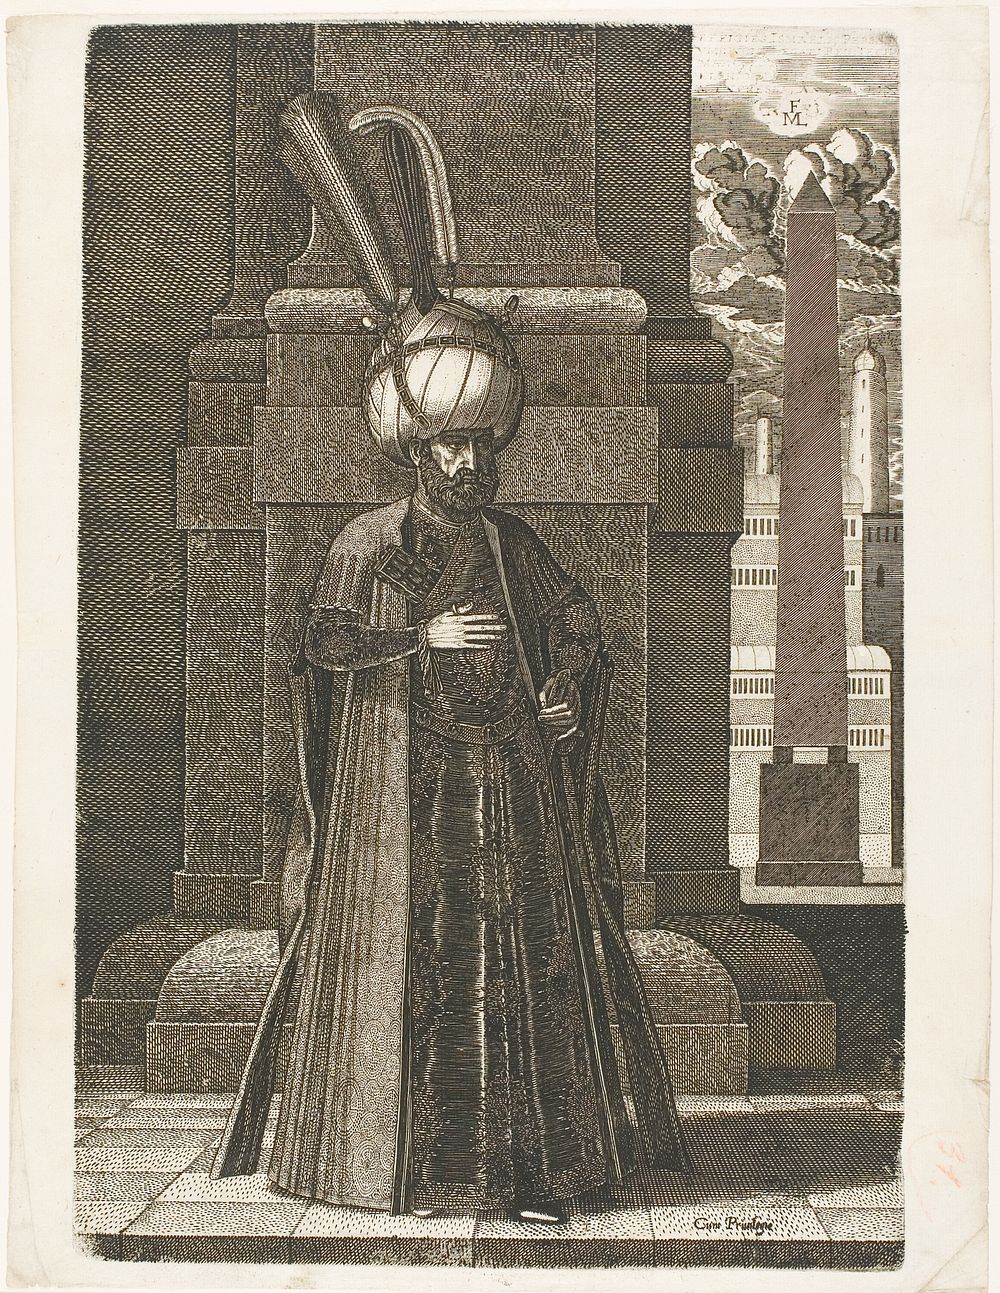 Portrait of Ismail, Ambassador of the Persian Shah Tahmasp I, Standing by Lorck, Melchior